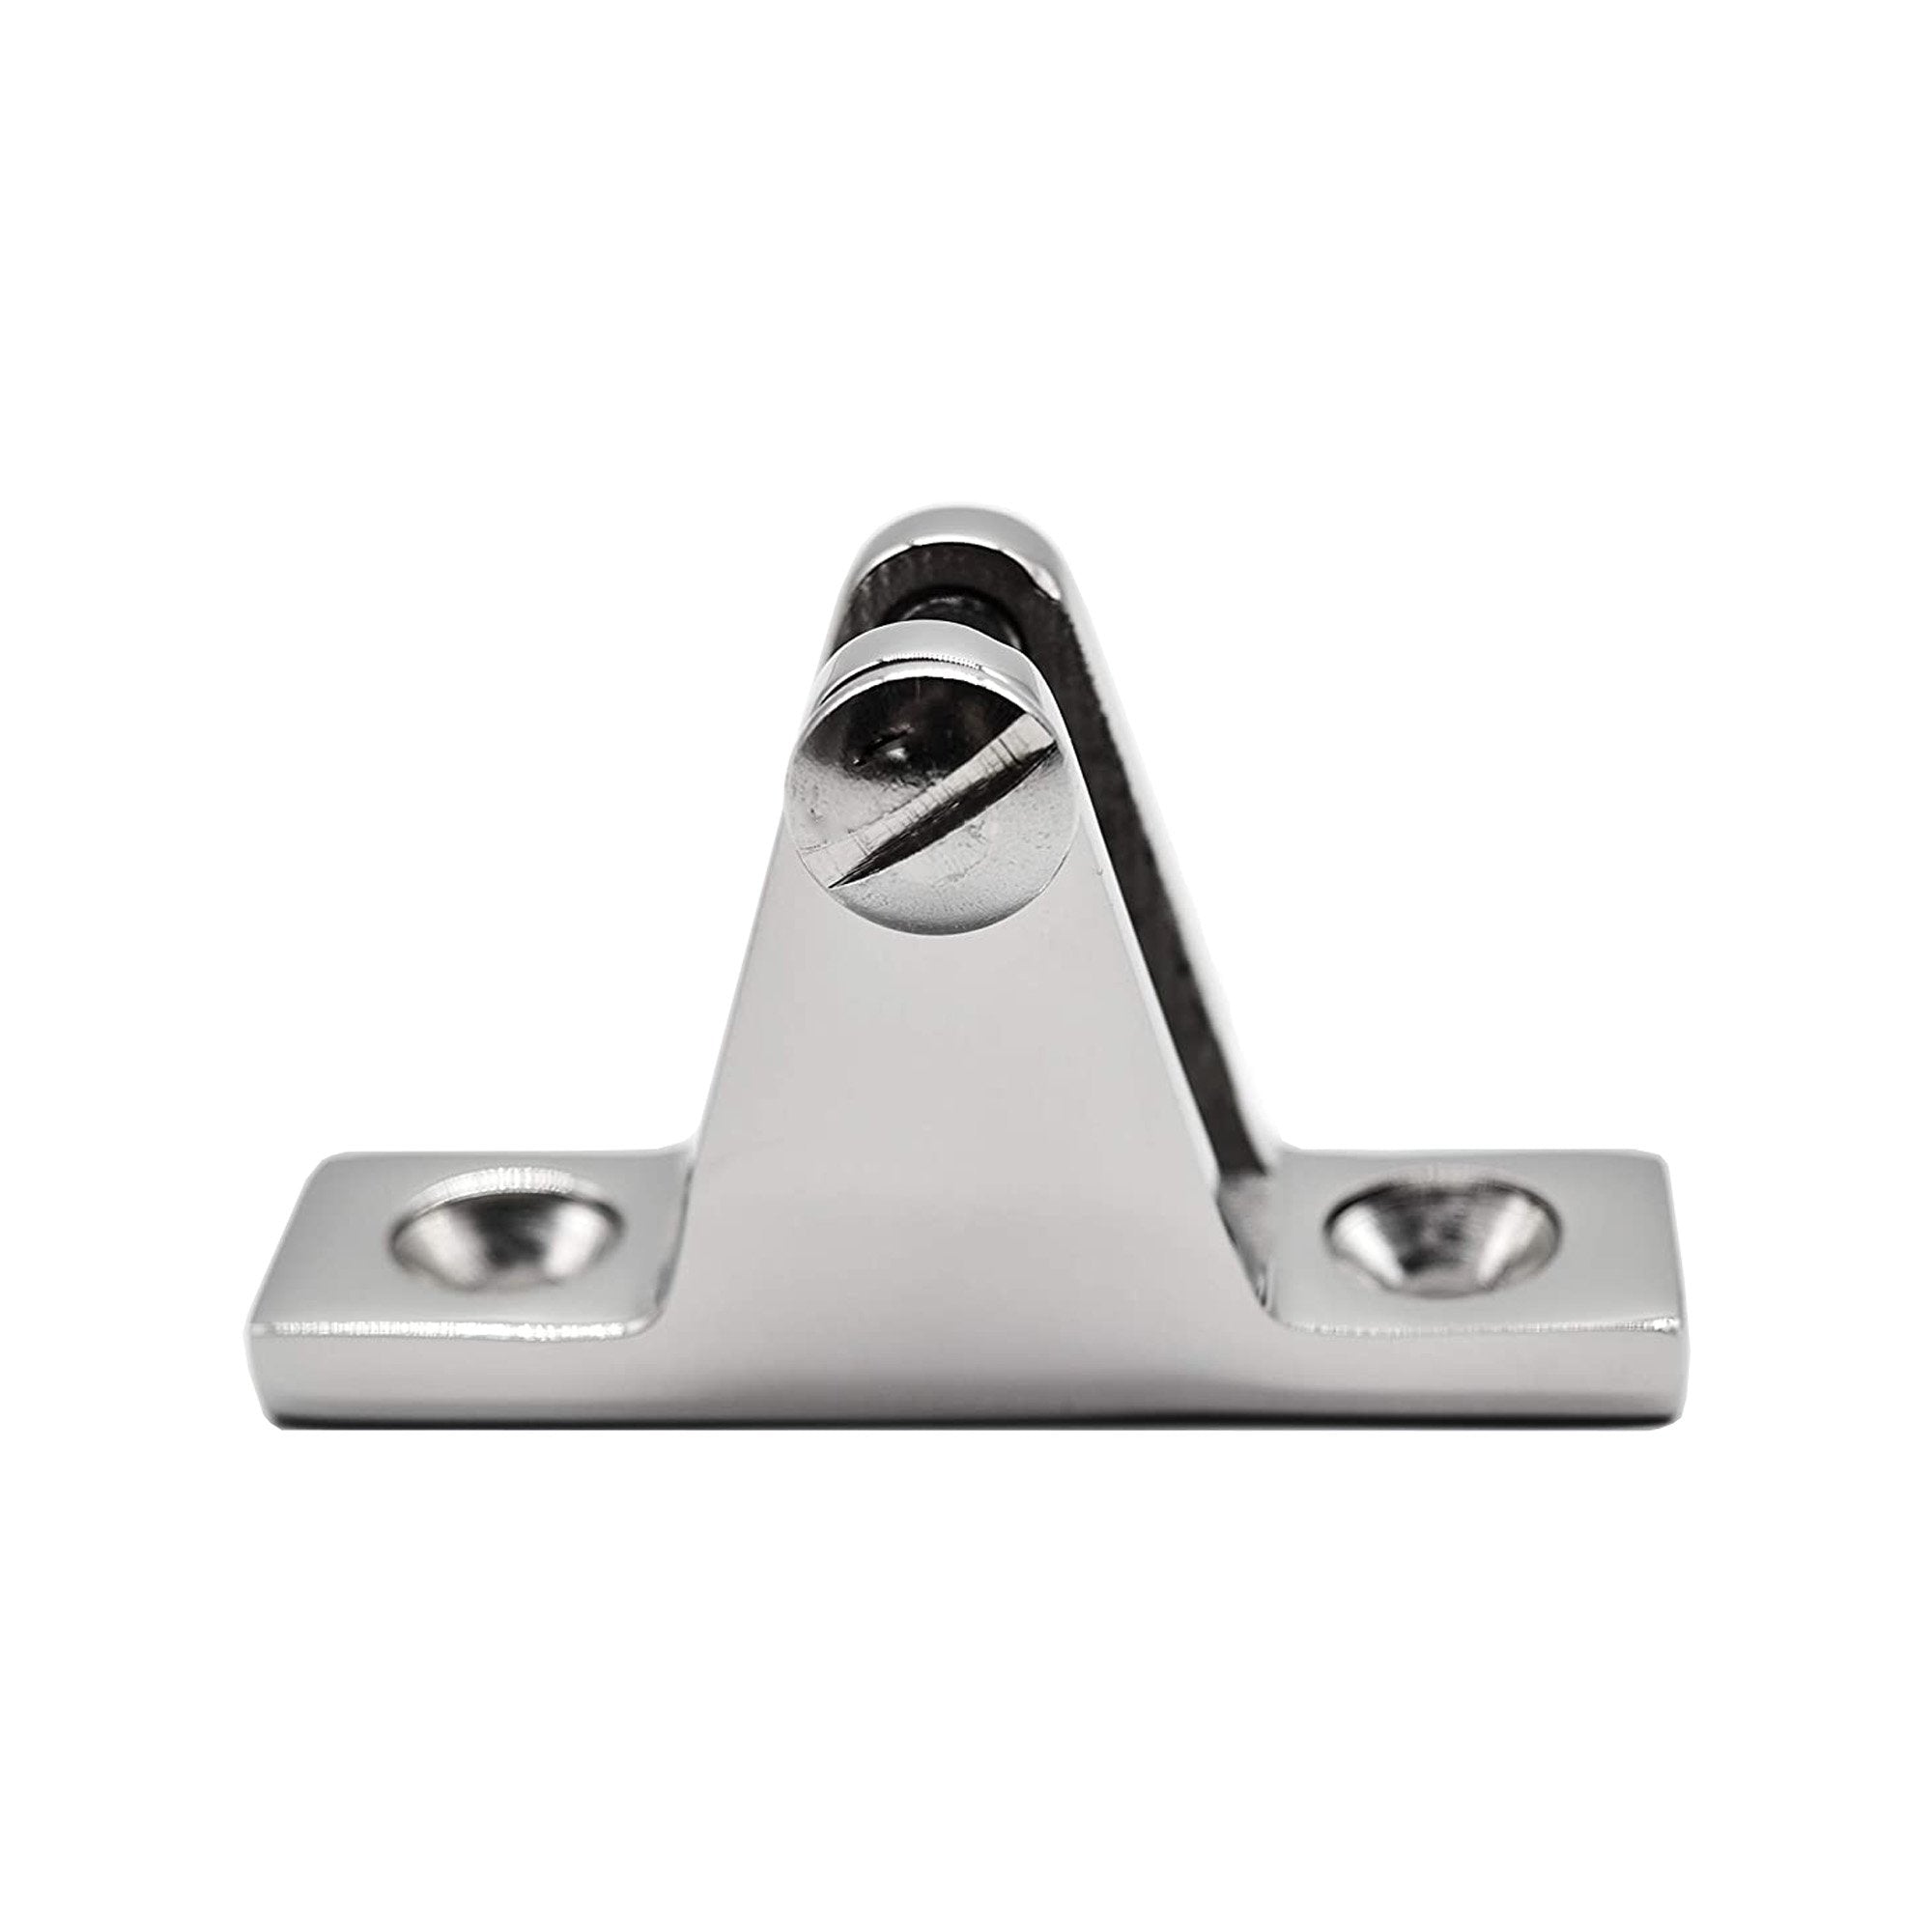 Bimini Top Quick Release Deck Swivel Hinge, 316 Stainless Steel Side Mount  Swivel Hinge Marine Hardware Accessories Fit for Fishing Boat Yacht (Pack